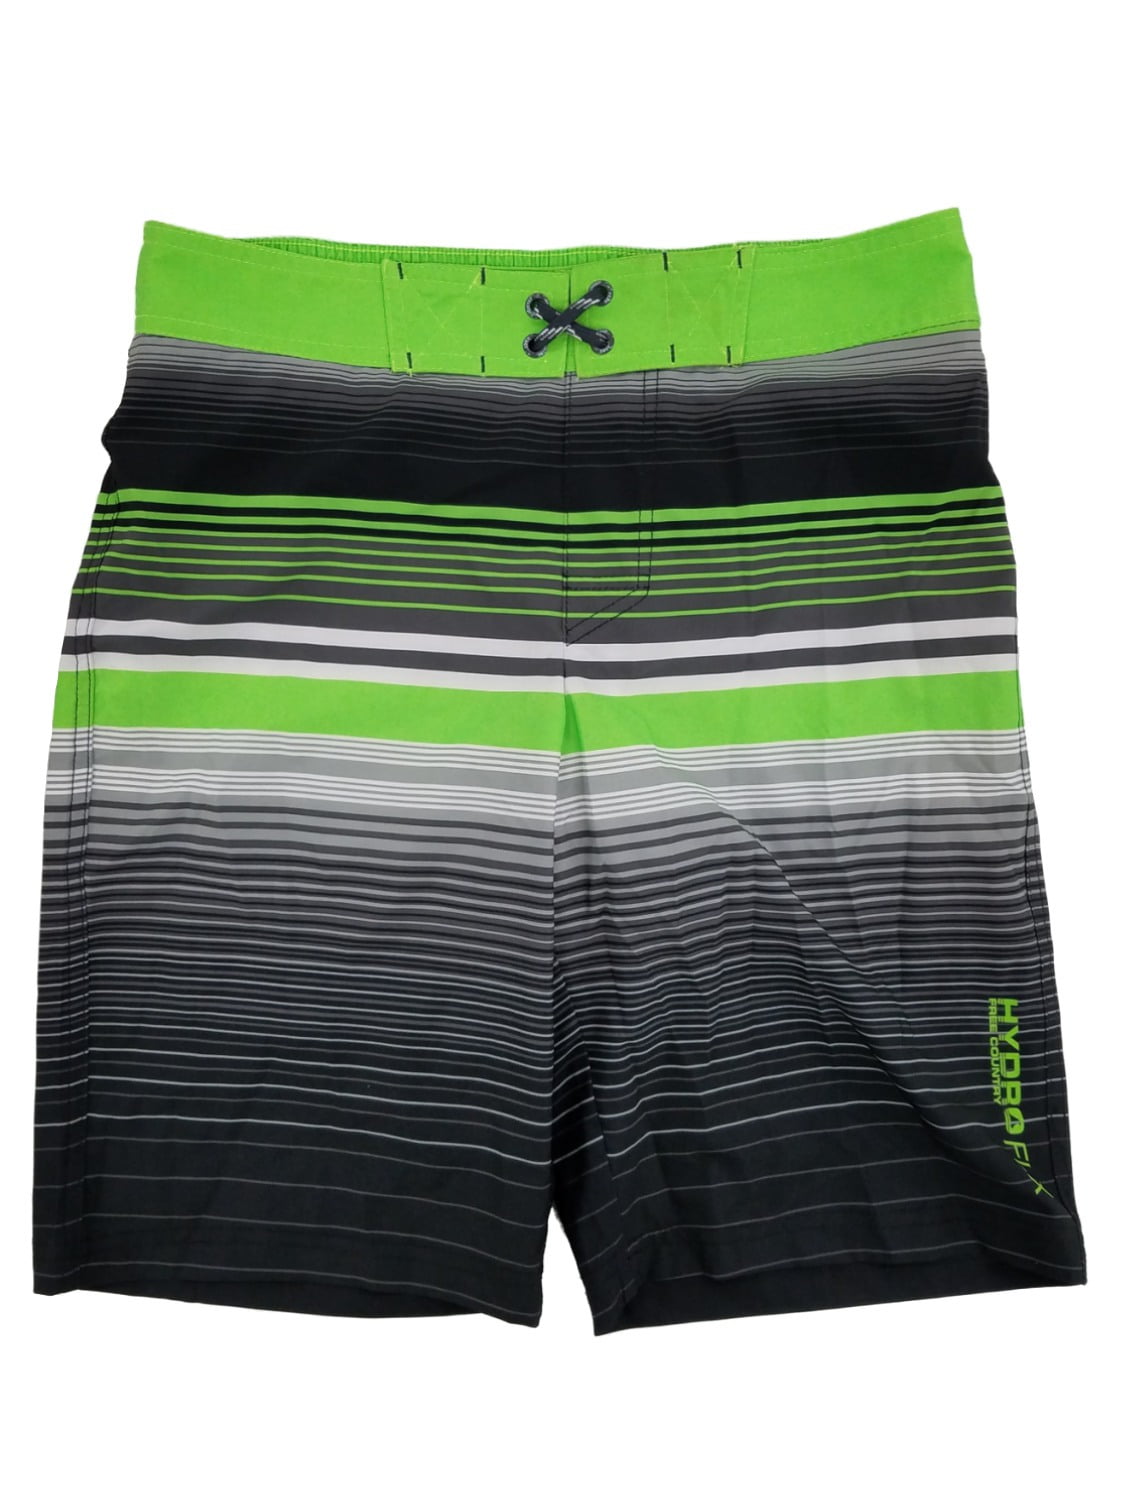 Xk7@KU Mens Quick Dry Beach Shorts Polyester Veloci Raptor Swimsuit with Pockets